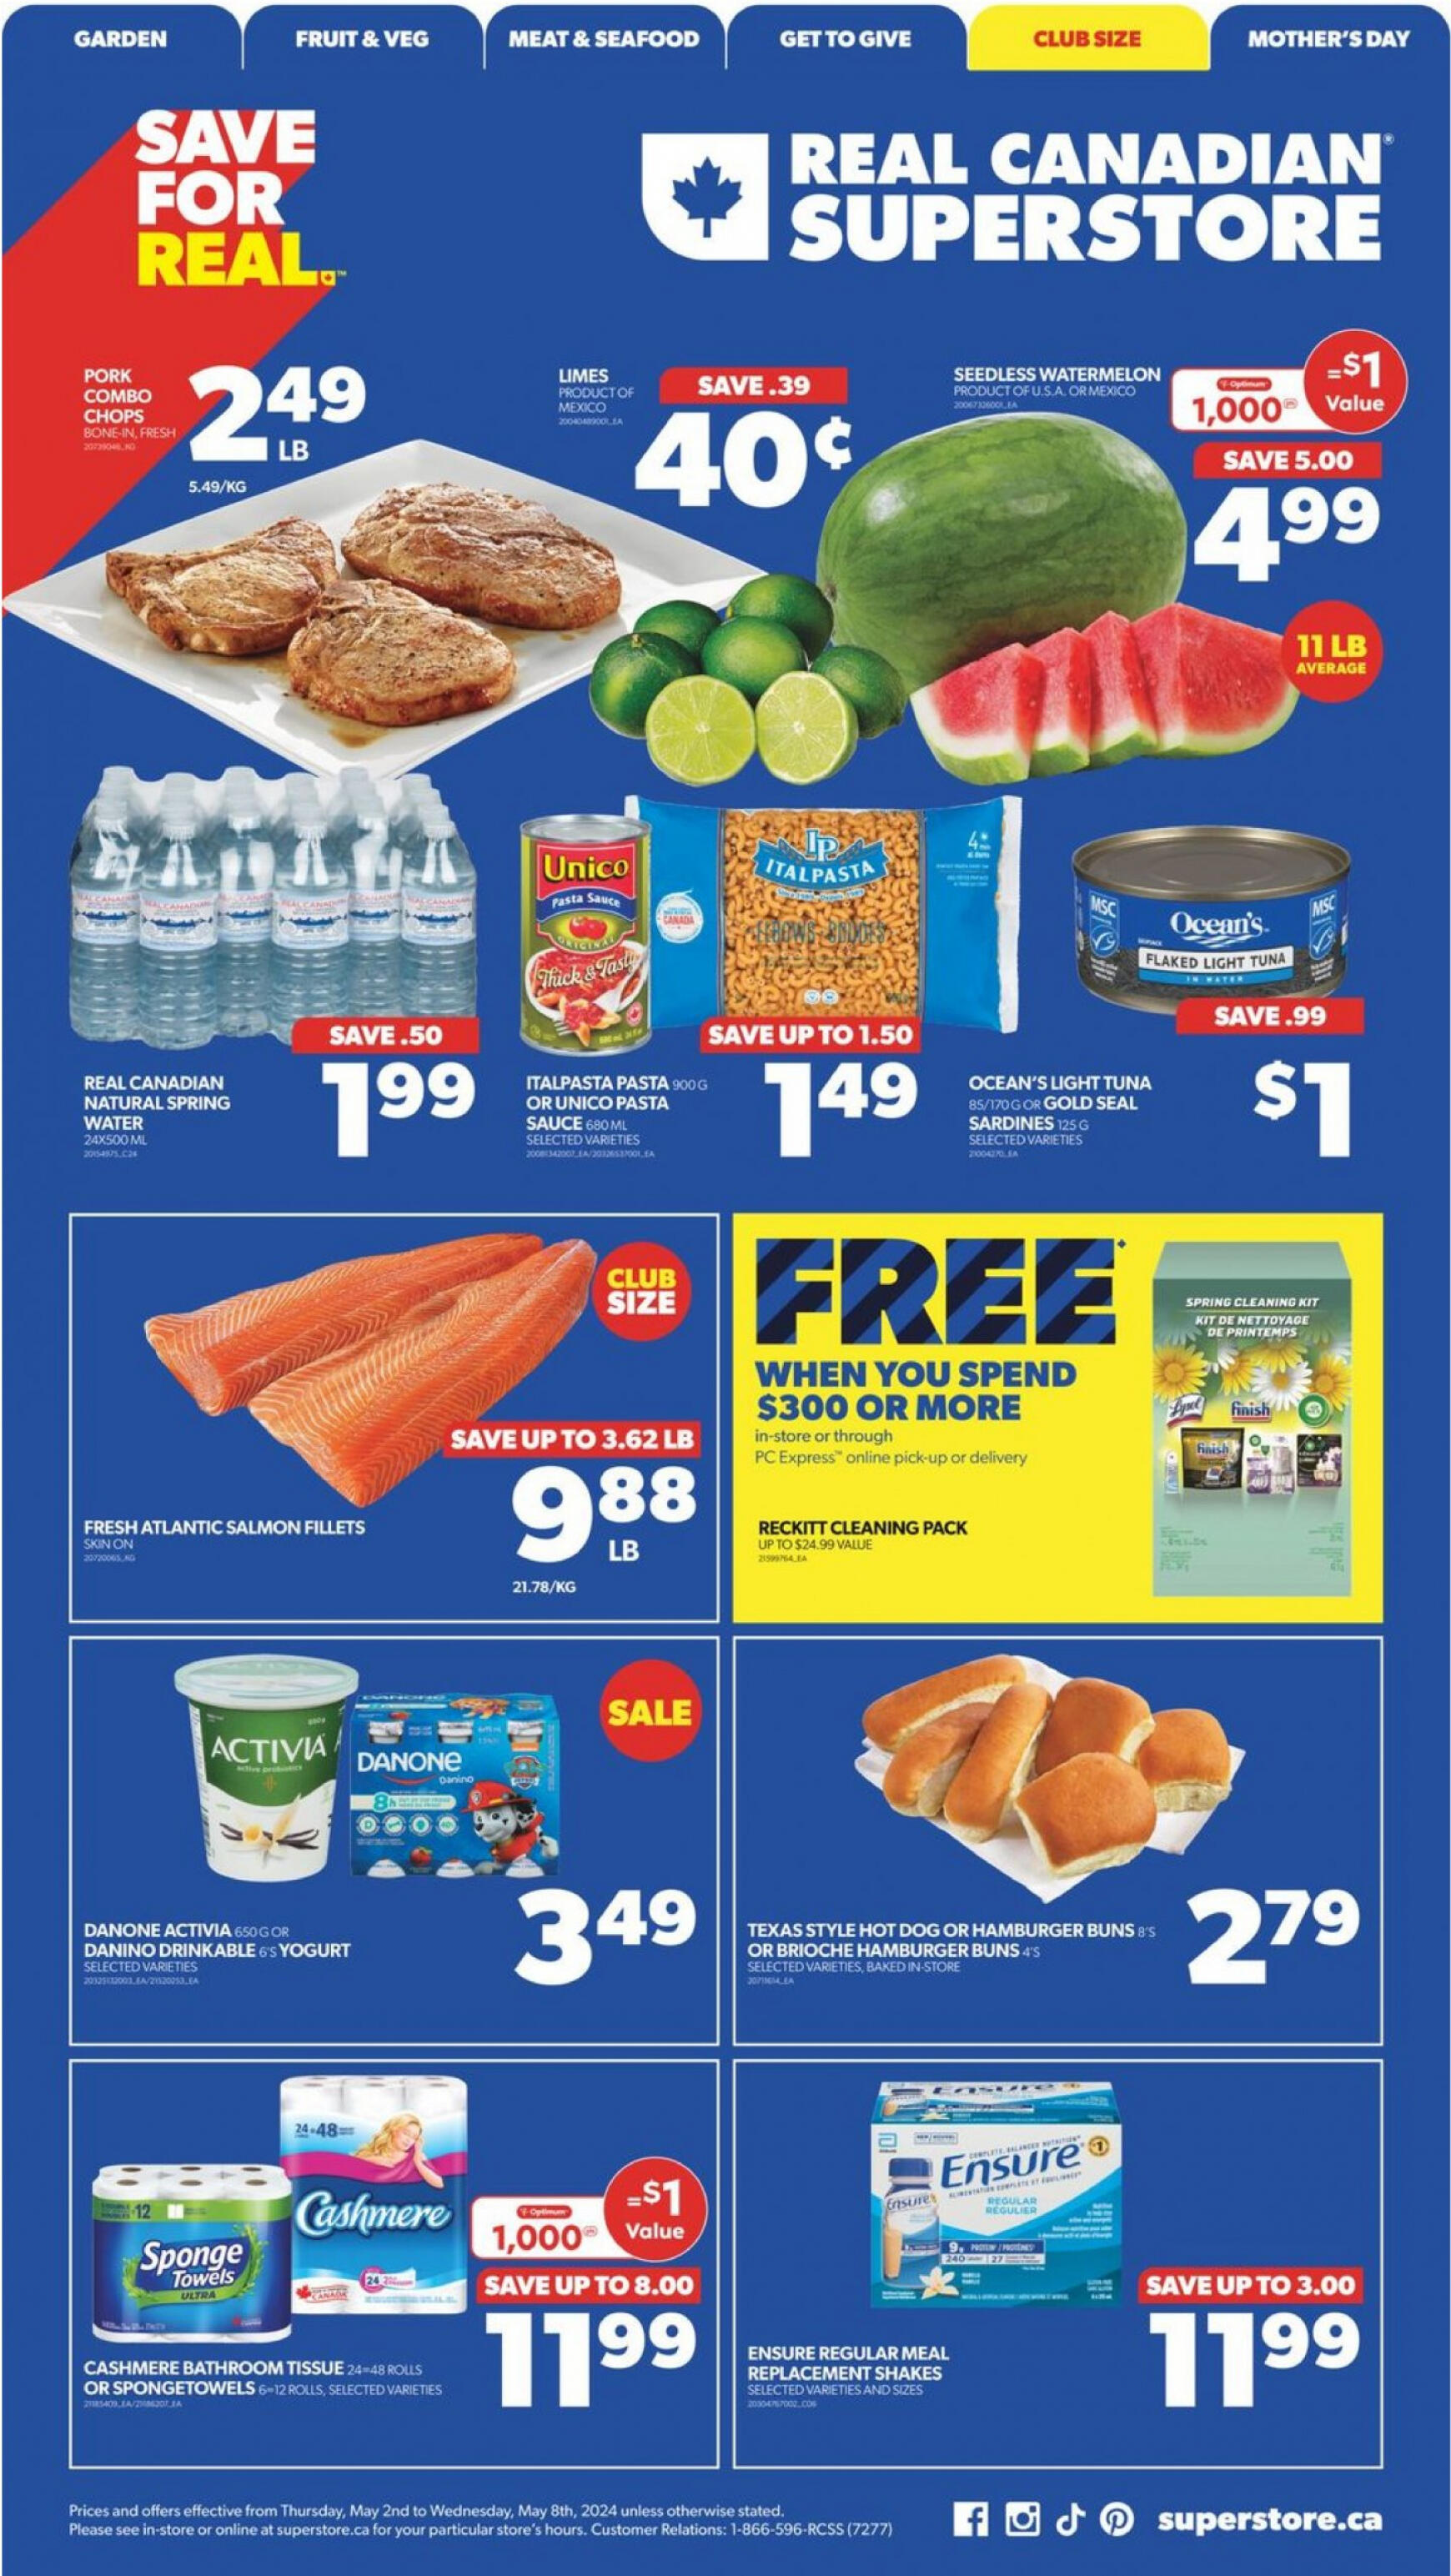 real-canadian-superstore - Real Canadian Superstore flyer current 02.05. - 08.05. - page: 3